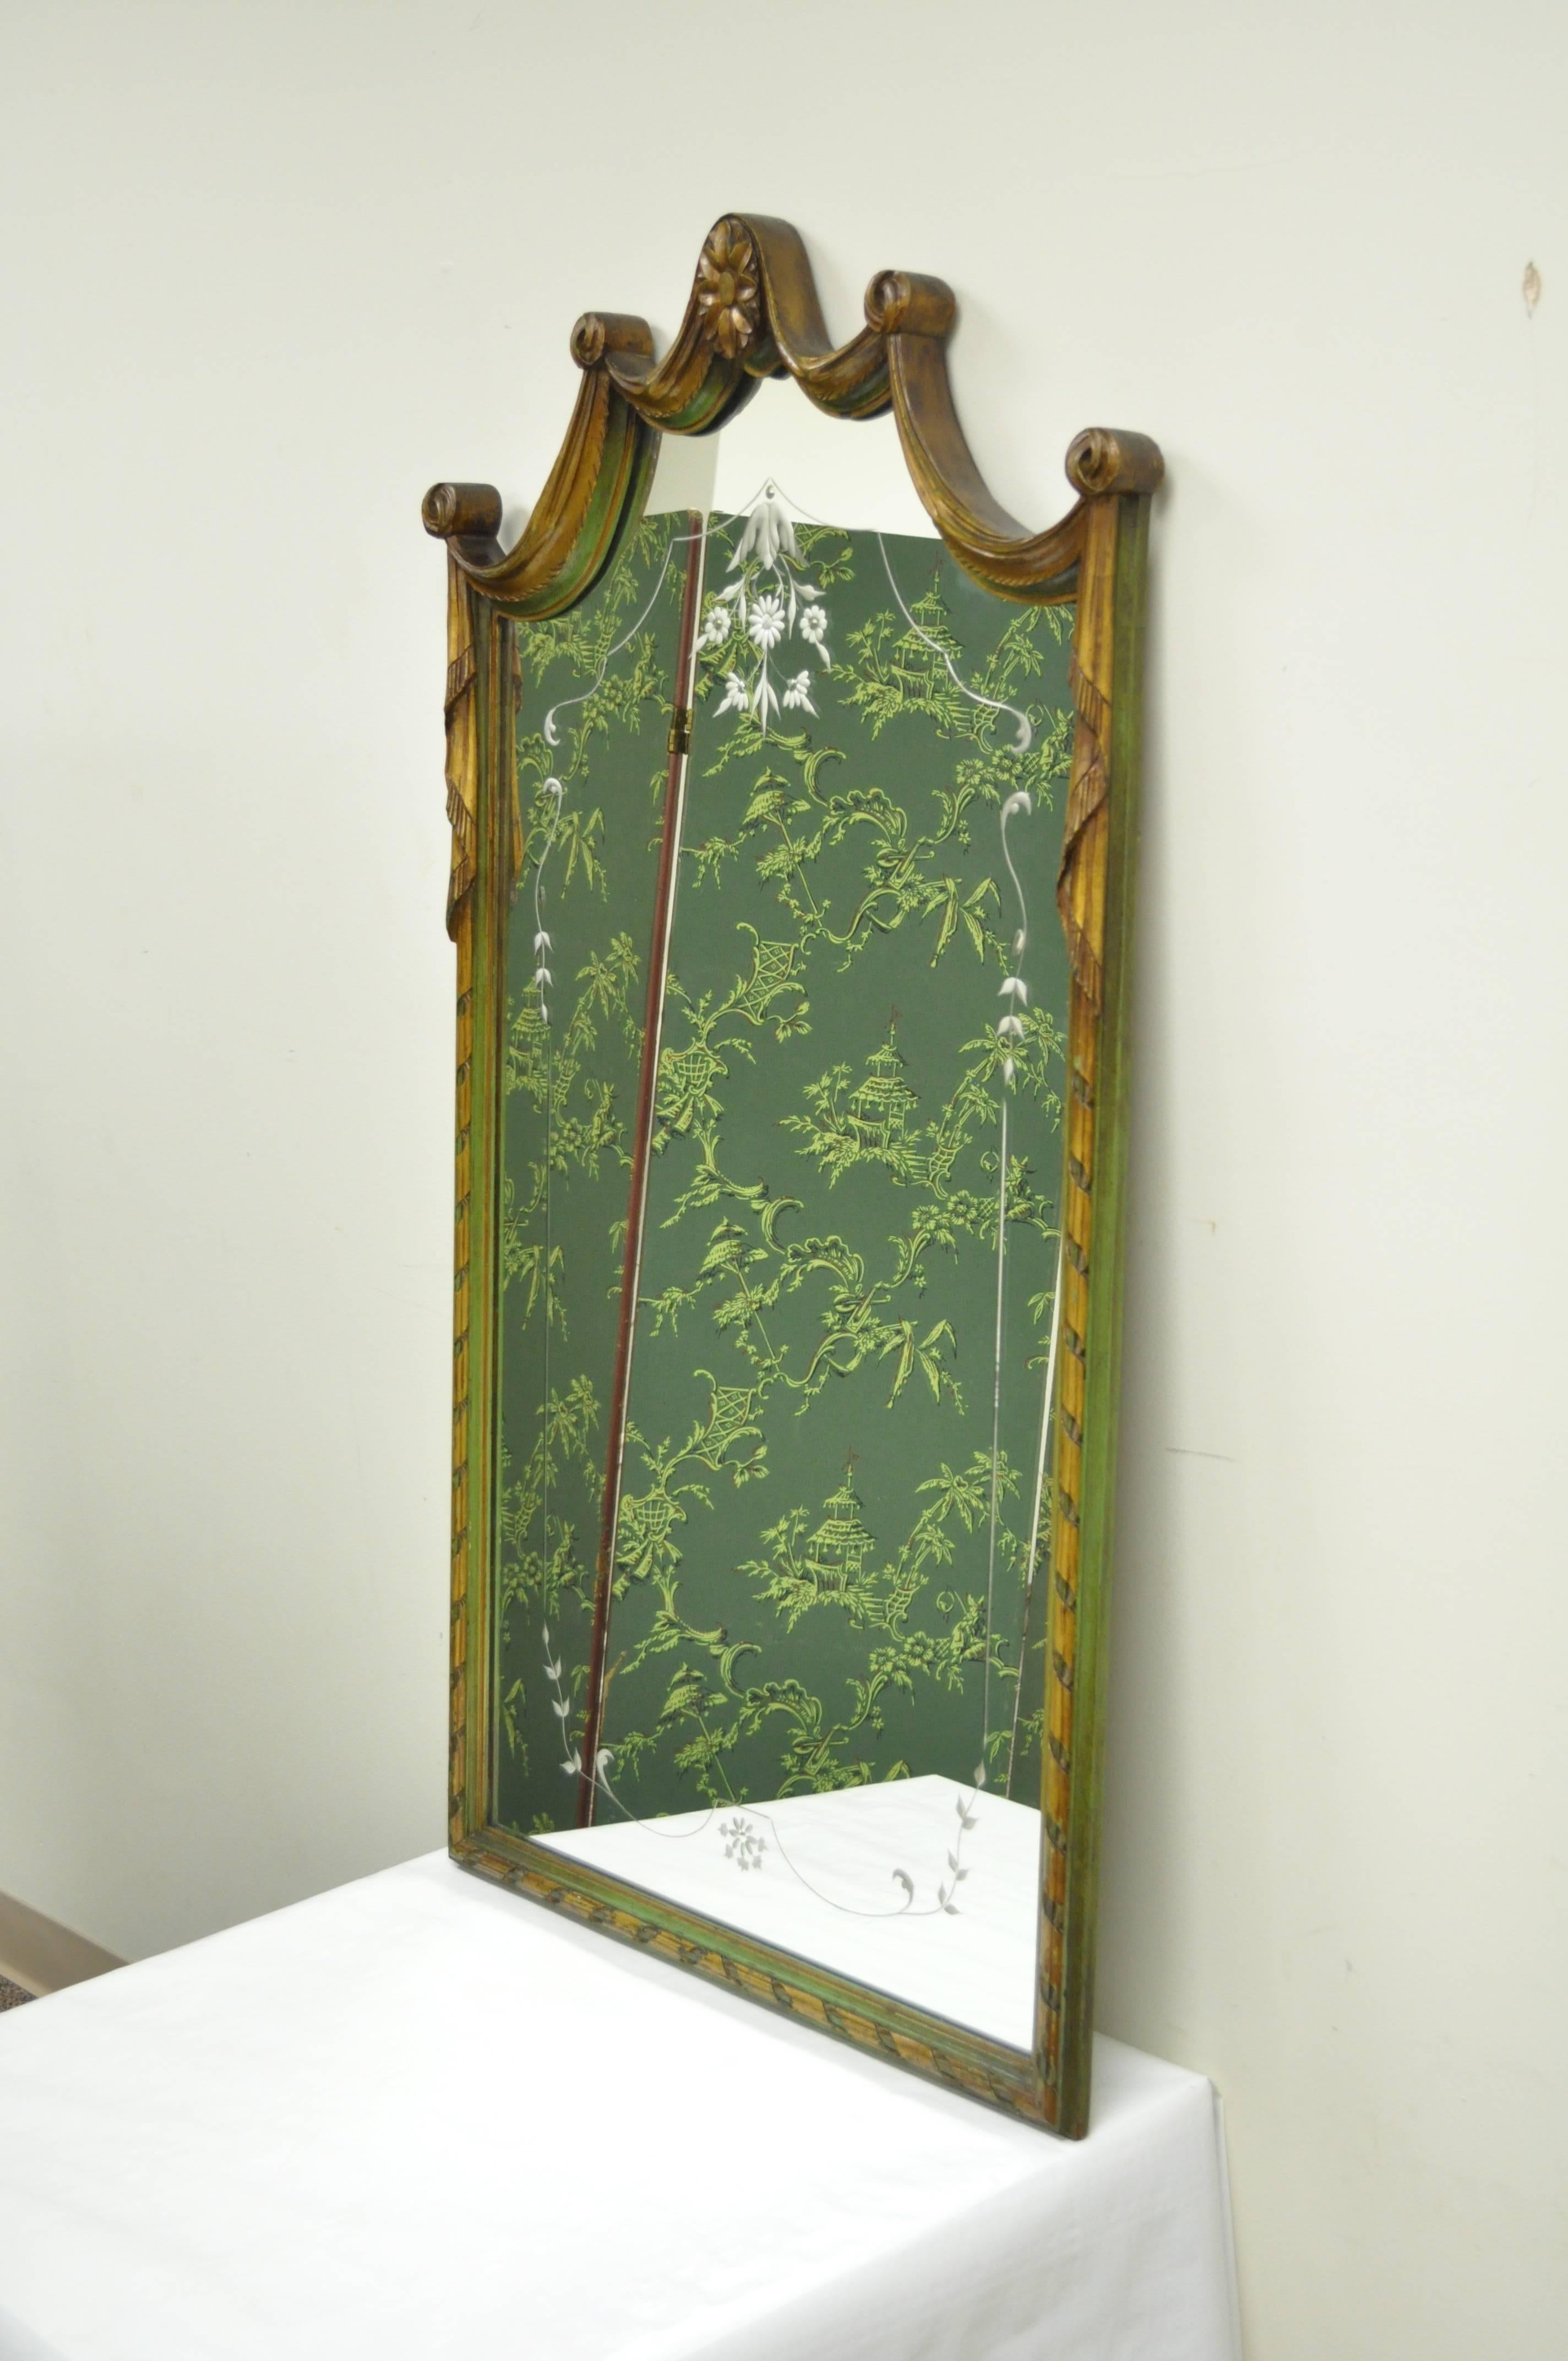 Early 20th century French Louis XV style green and gold carved wood etched glass wall mirror. Item features a solid carved wood frame with arched drape pediment, green and gold painted finish, and floral etched glass detailing to the mirror.